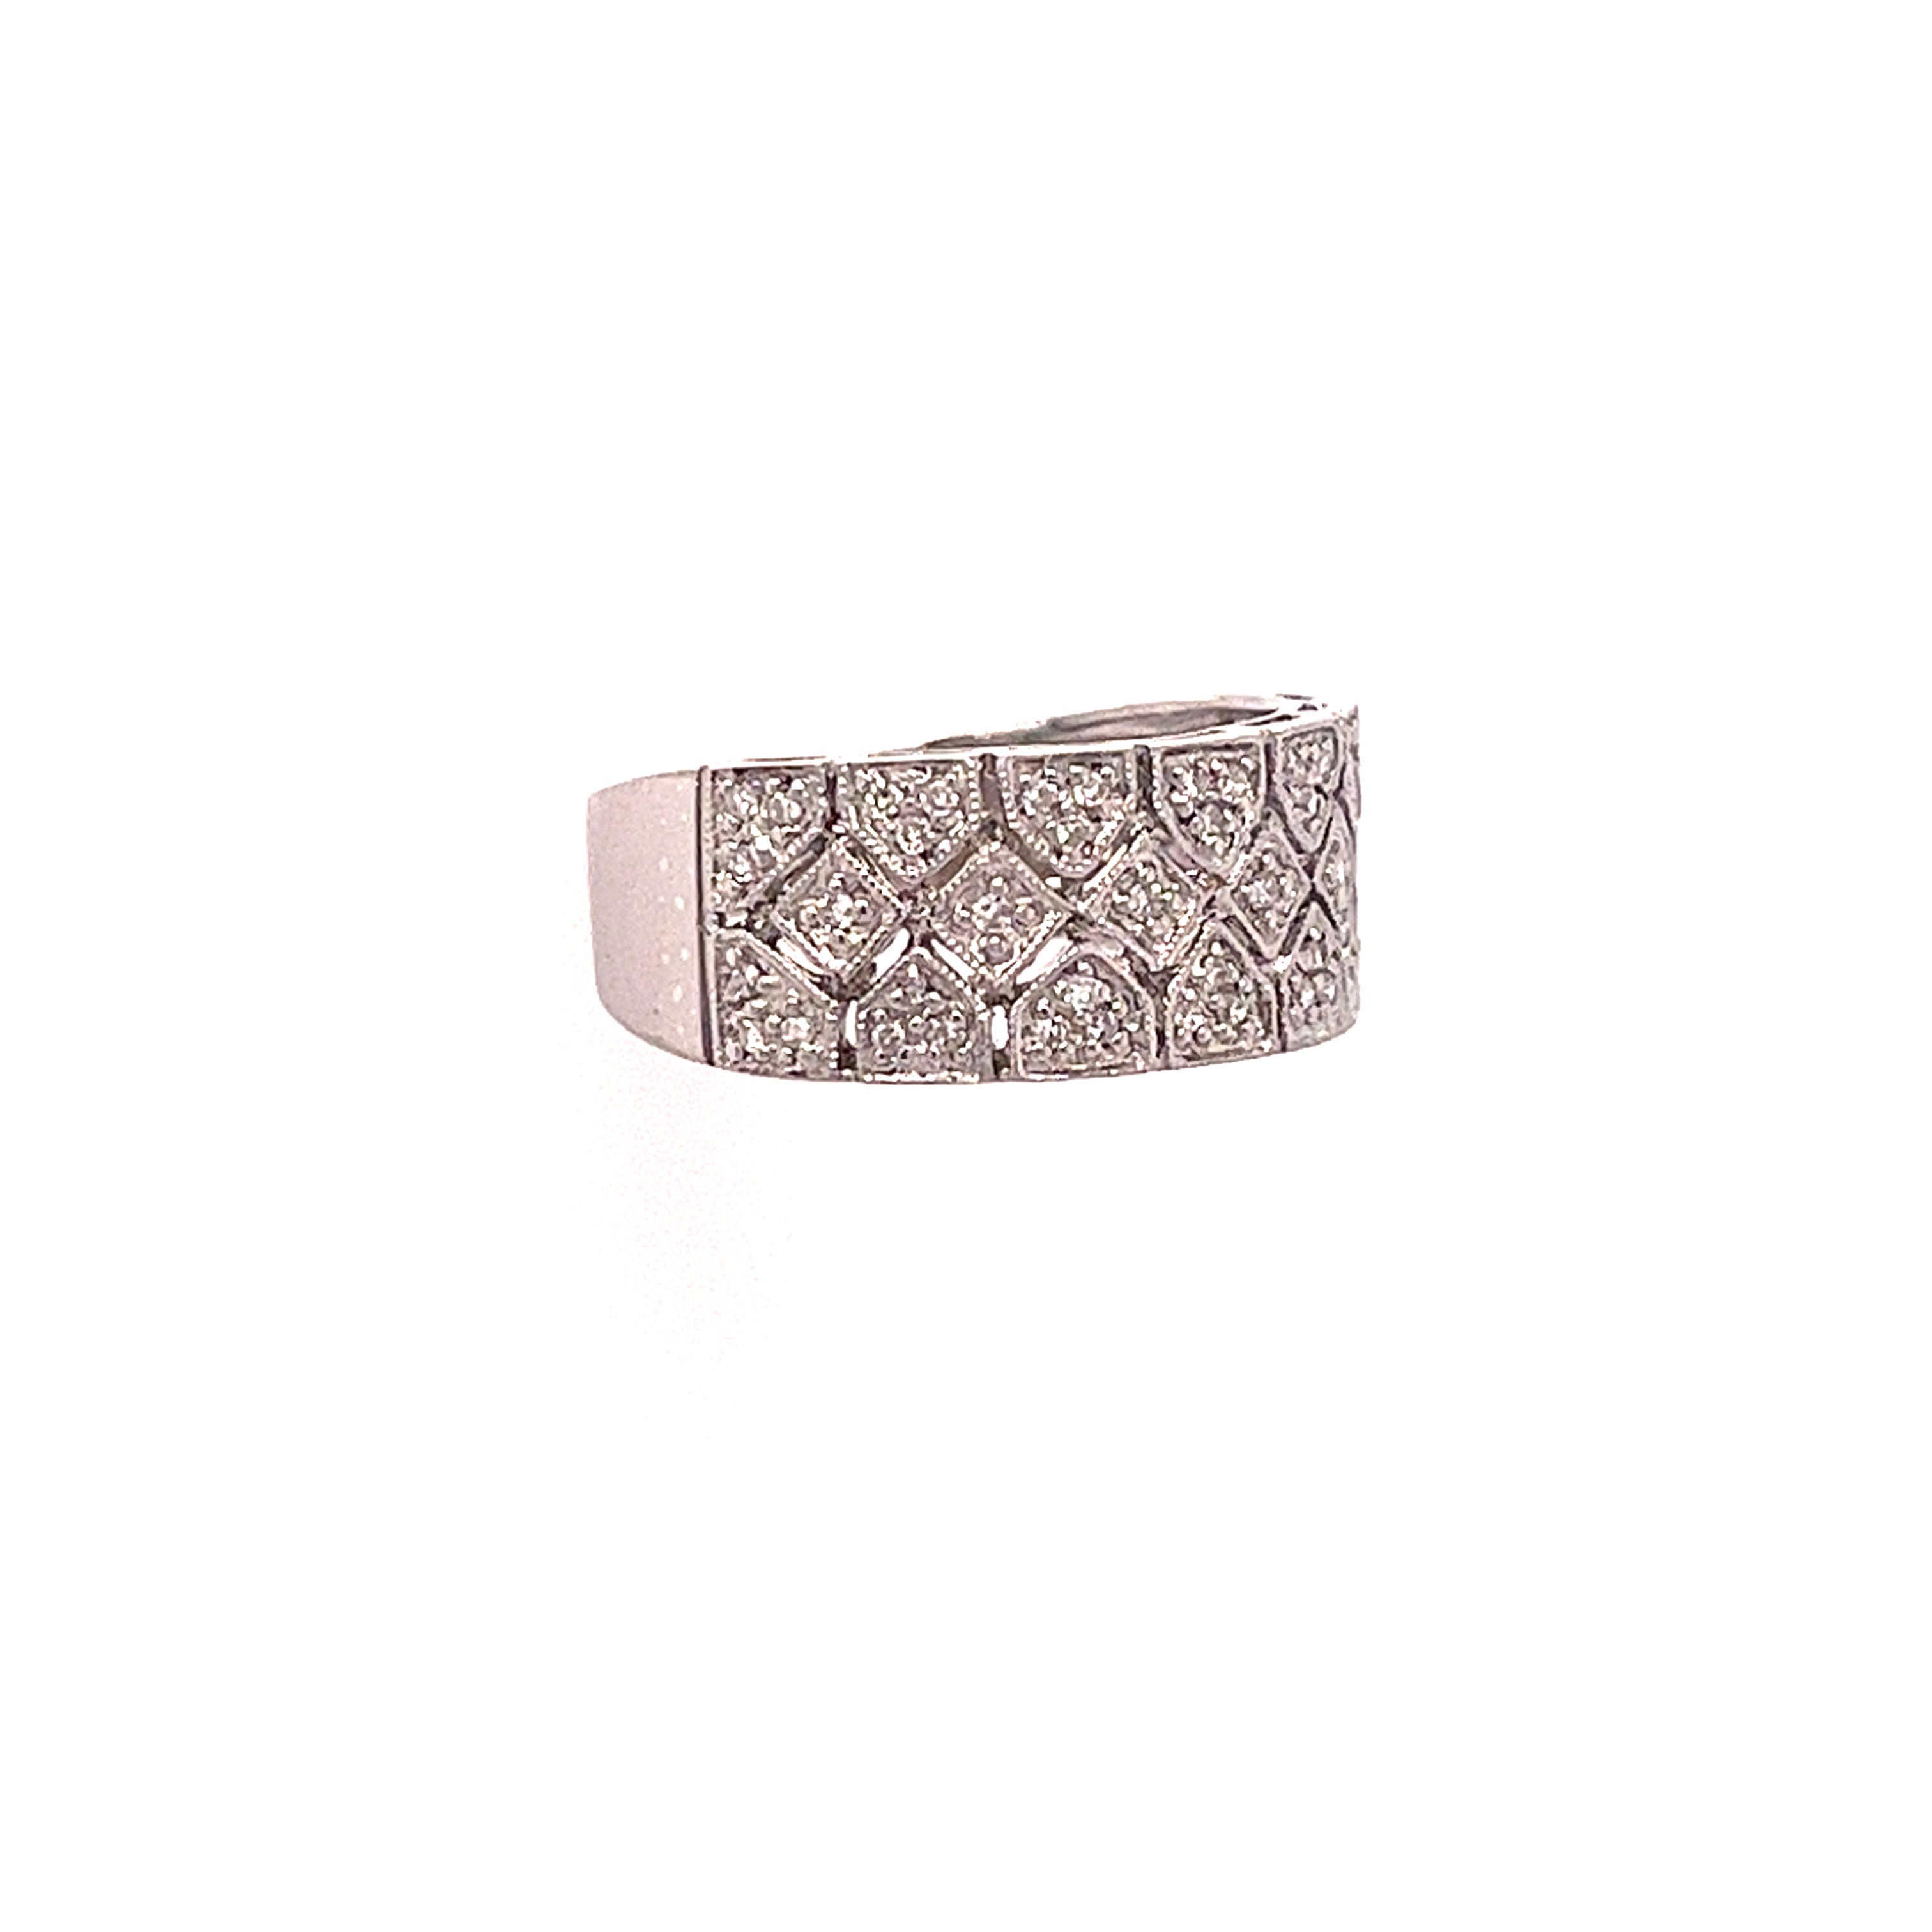 14KT WHITE GOLD ANTIQUE LOOK DIAMOND BAND